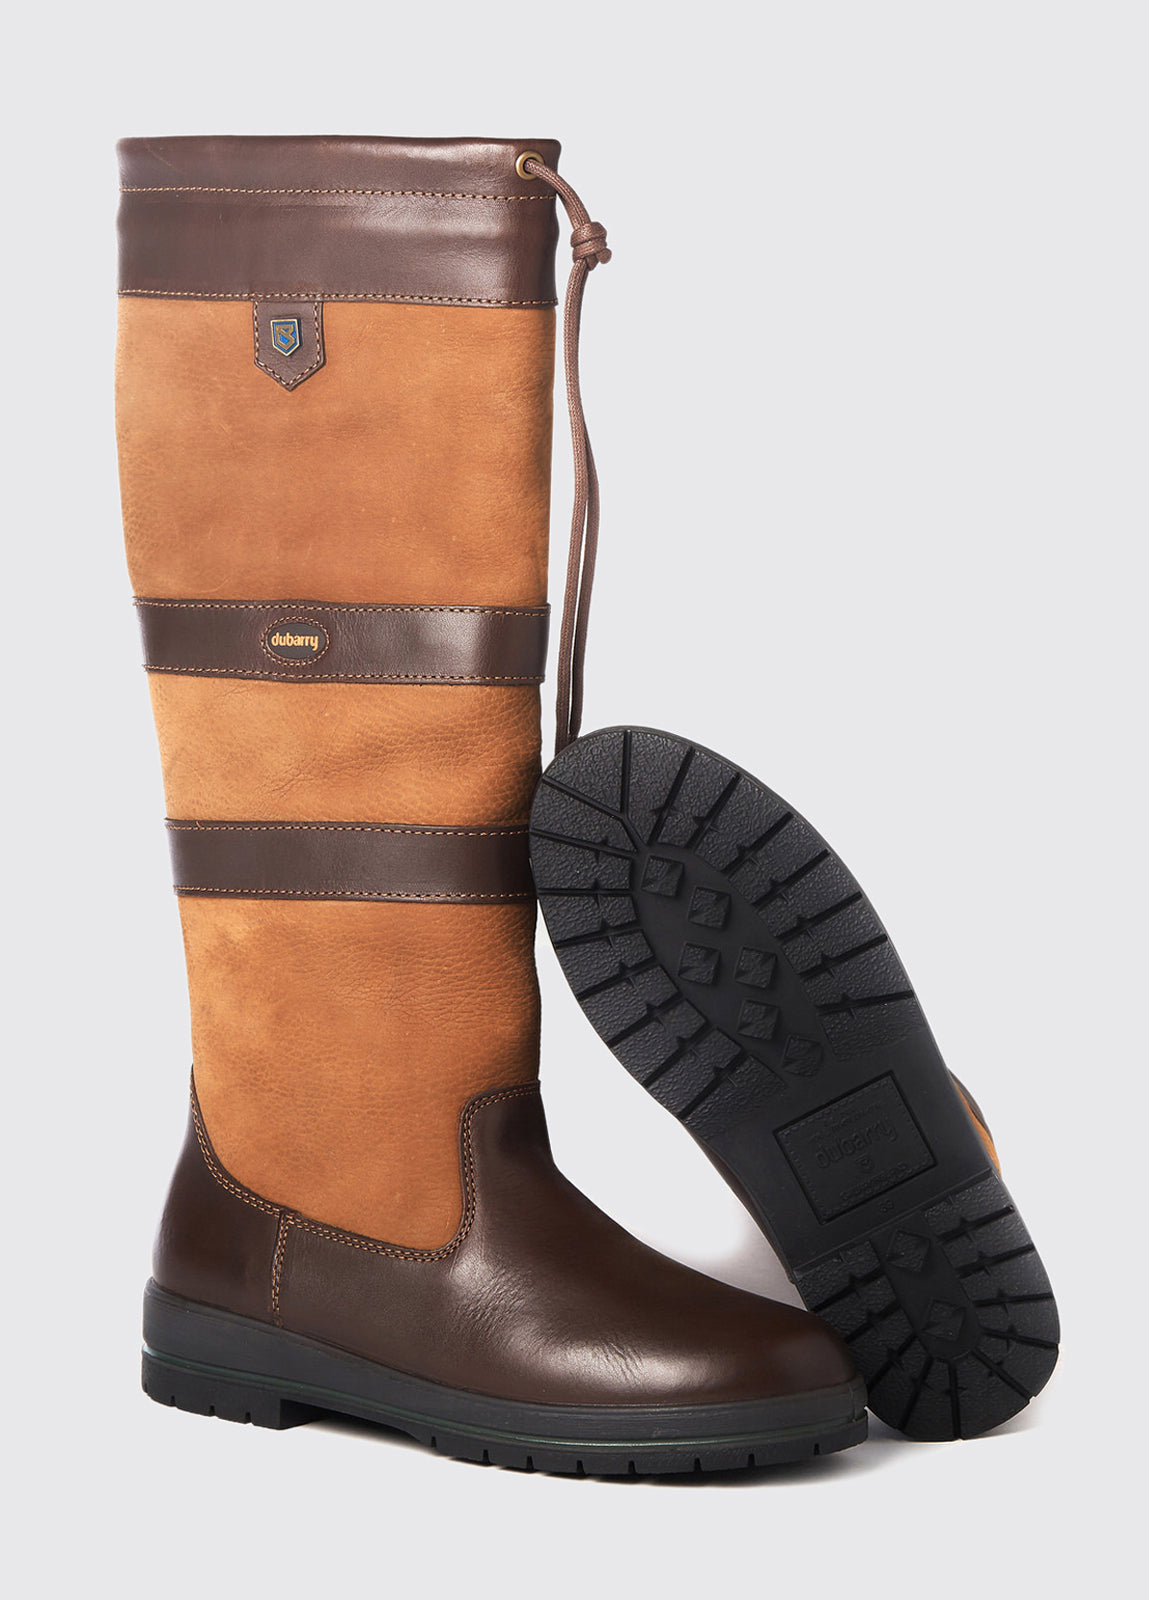 Dubarry Galway Country Boot in Brown Mahogany